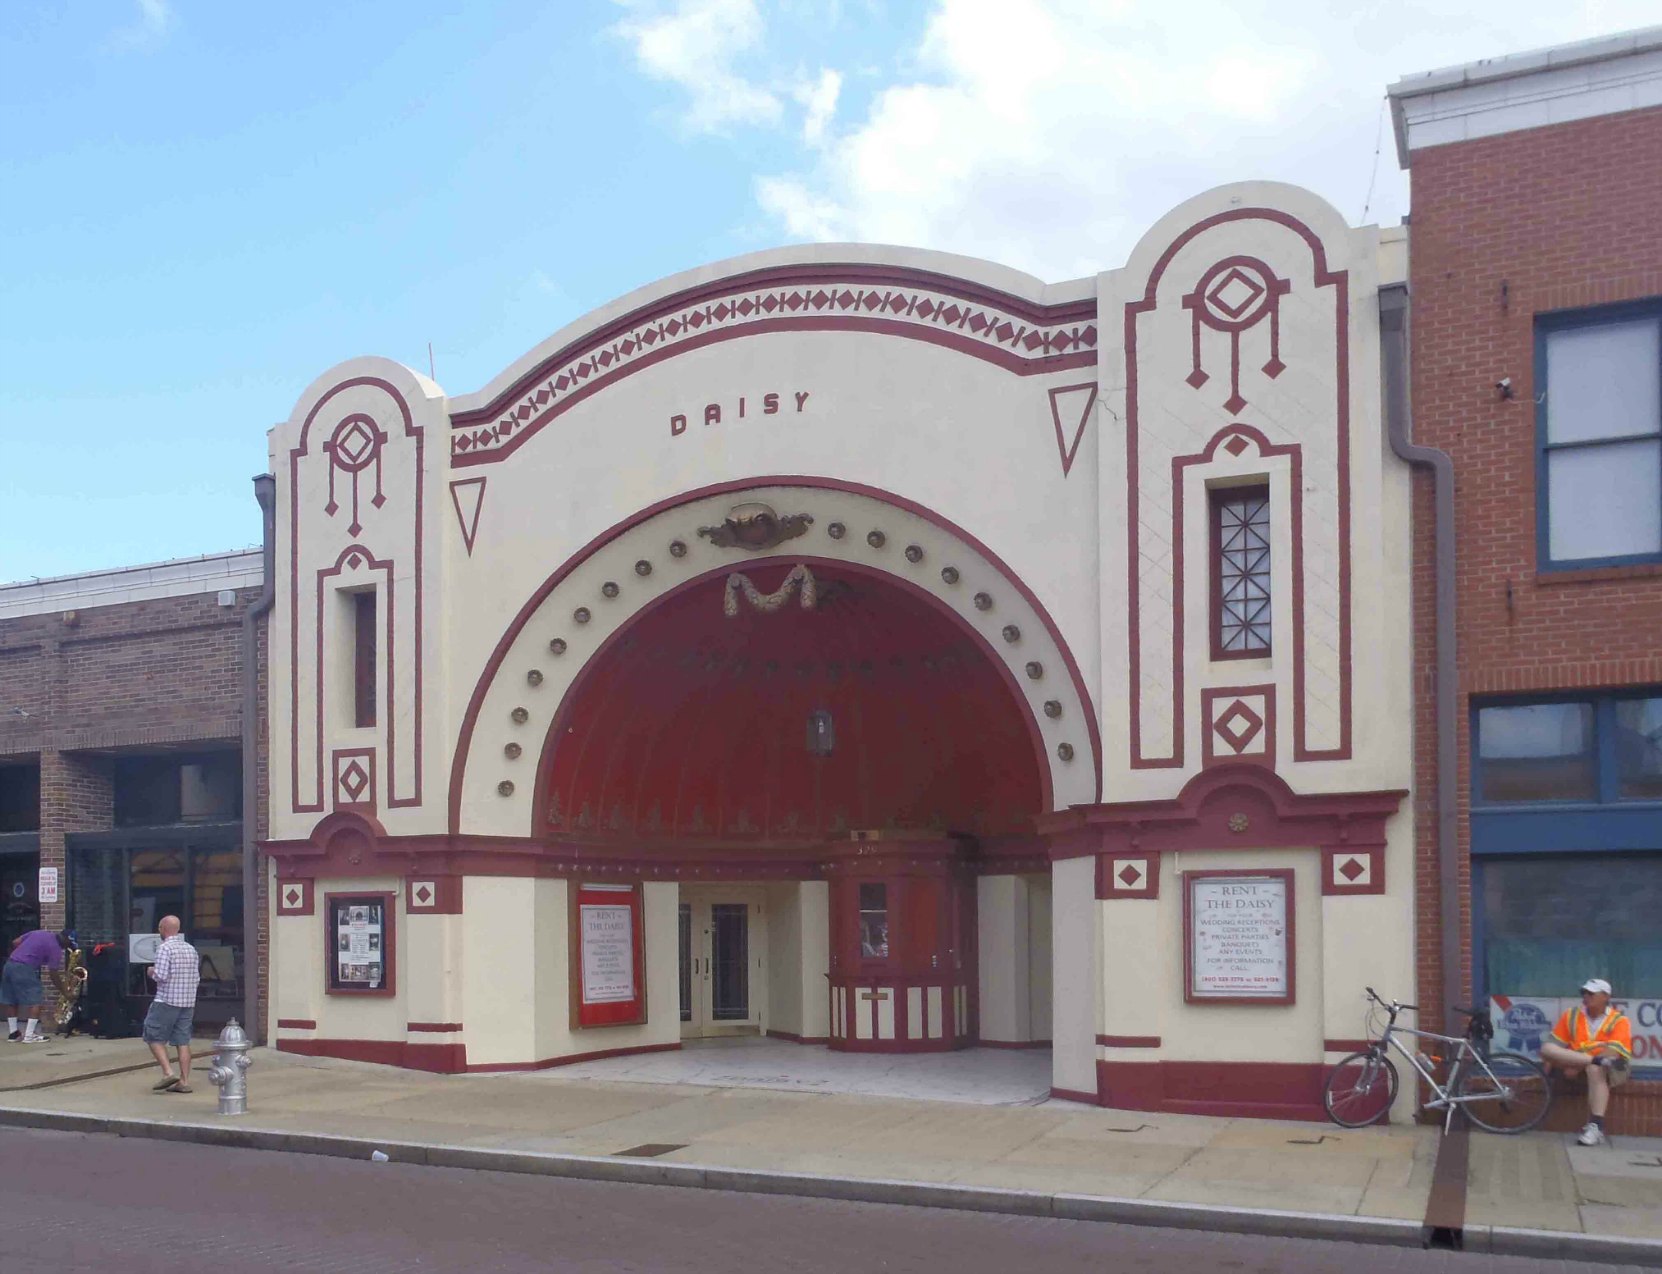 The Daisy Theatre, 329 Beale Street, Memphis, Tennessee